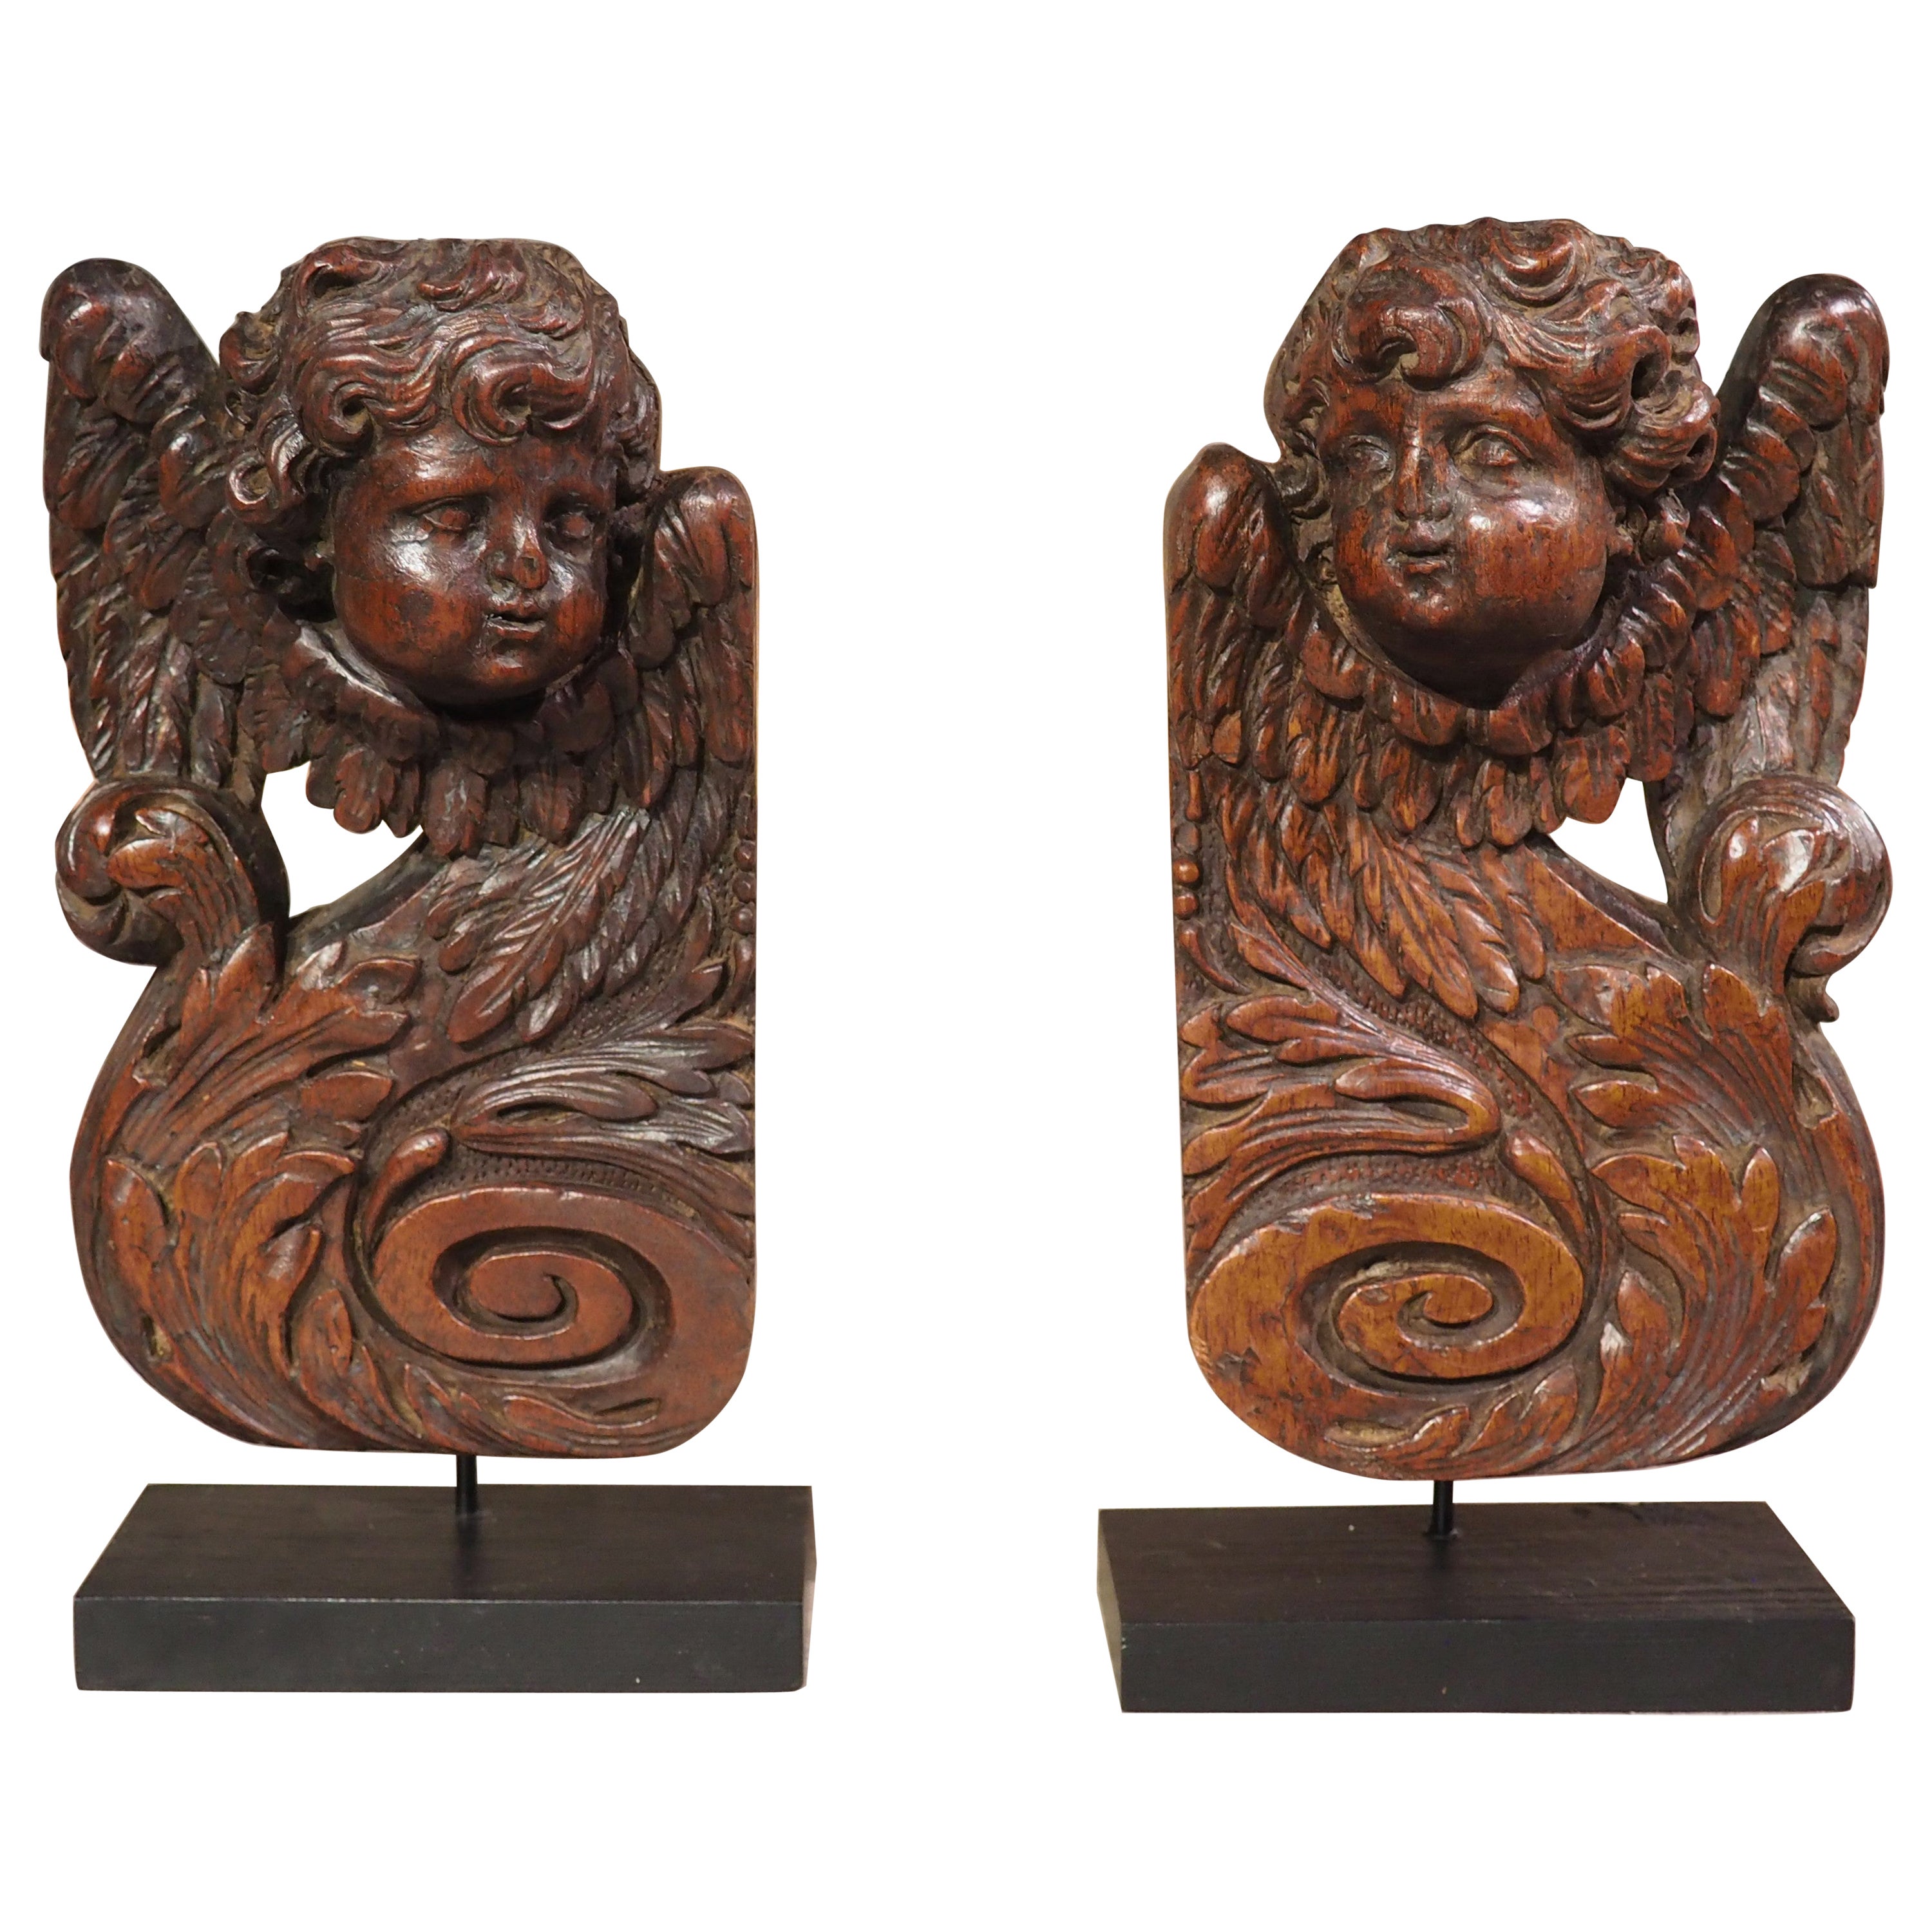 Pair of Small 17th Century Walnut Wood Angel Sculptures from France